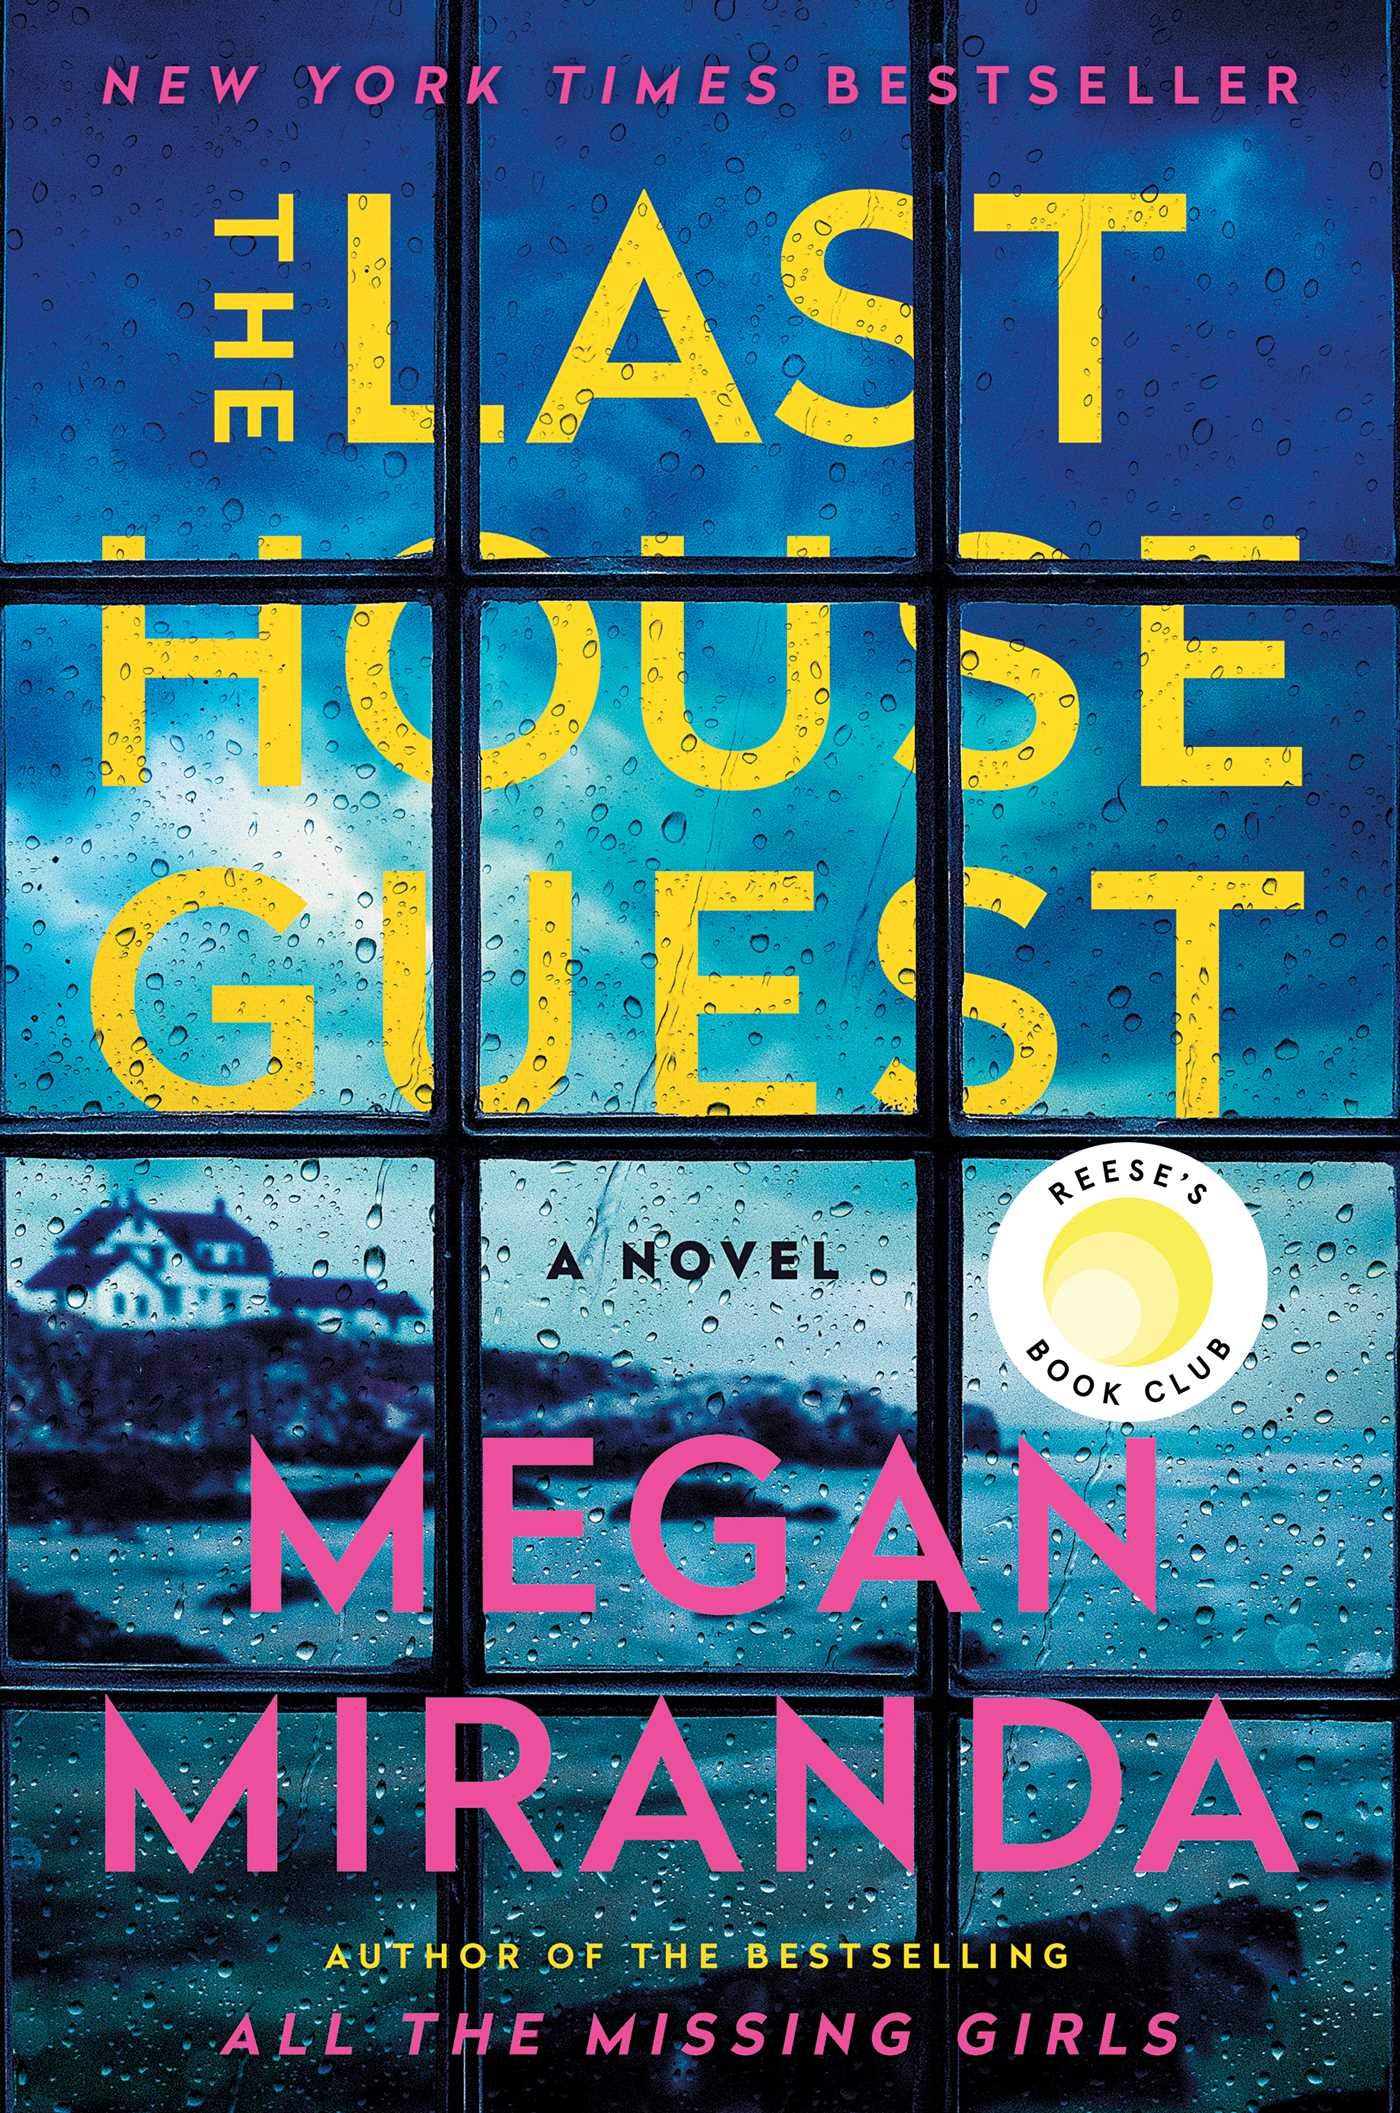 Book cover of The Last House Guest, by Megan Miranda